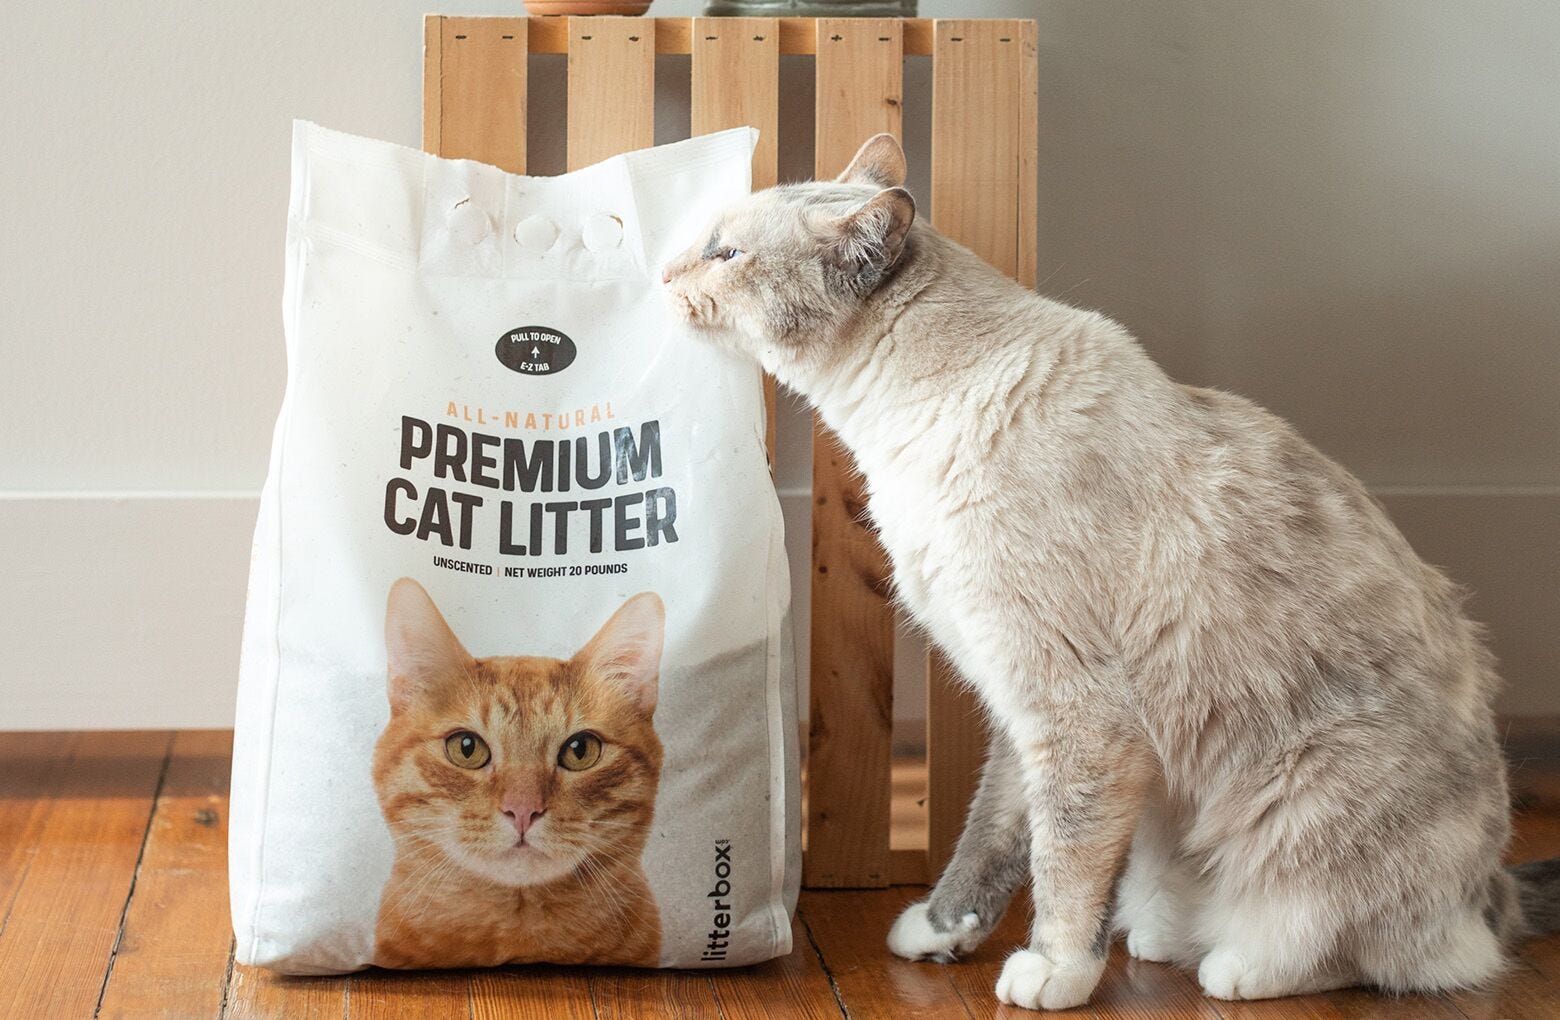 Grey cat next to a 20 pound bag of cat litter